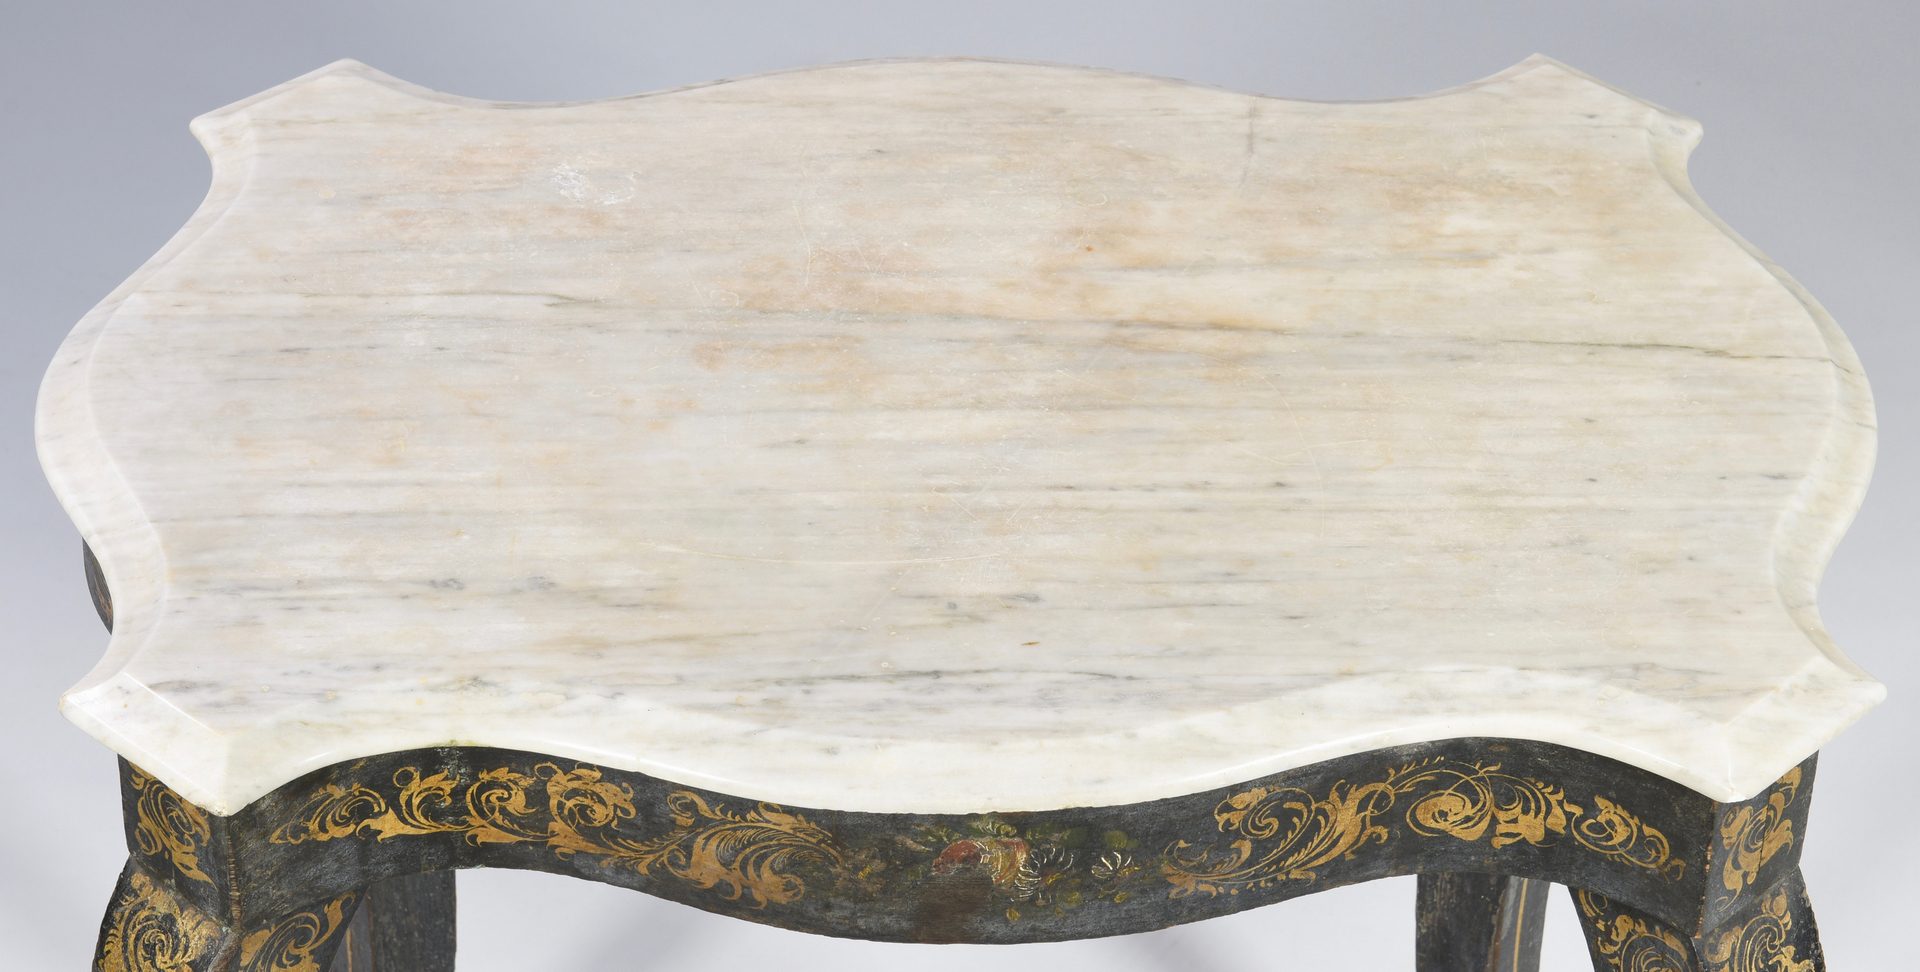 Lot 593: 19th c. Continental Painted Classical Table